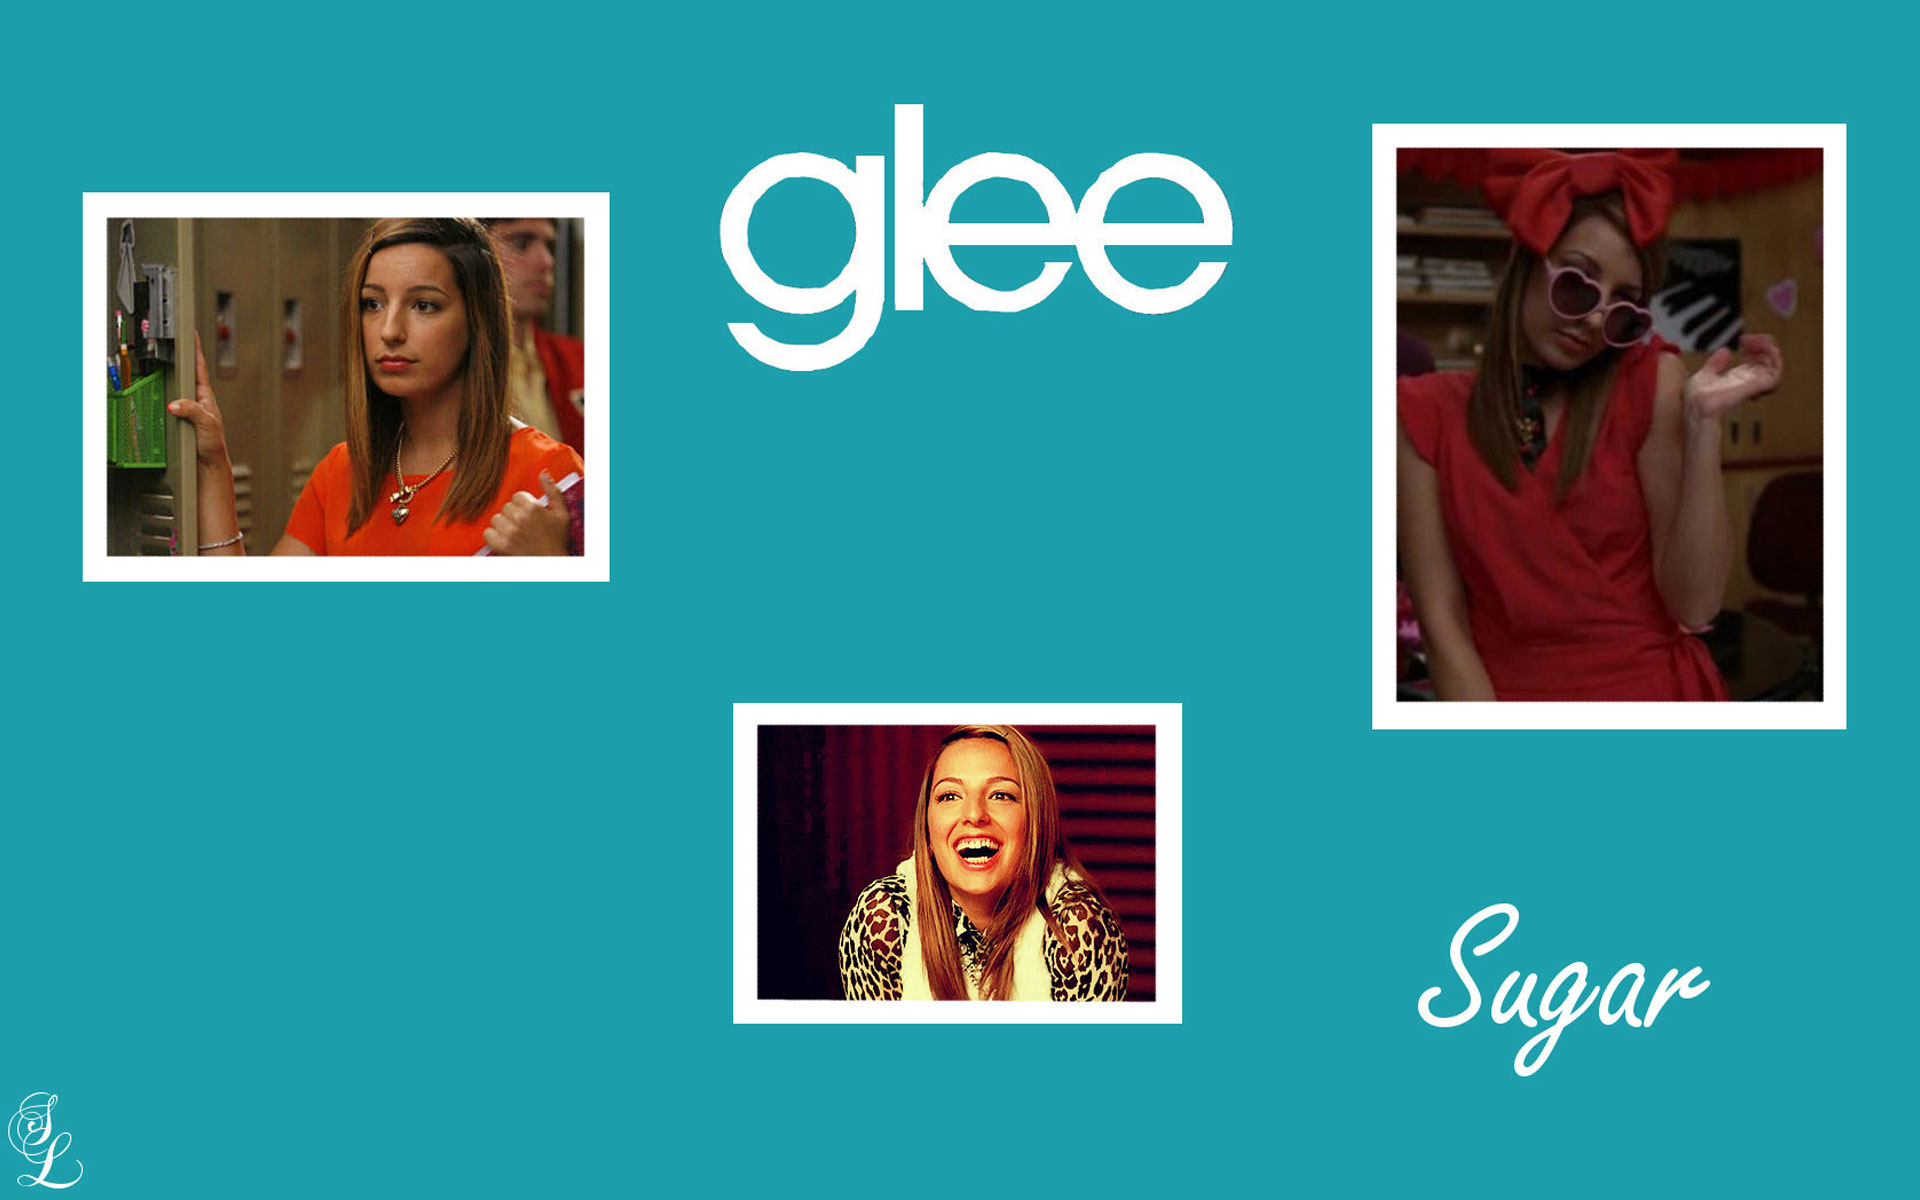 Glee 4k Wallpapers For Your Desktop Or Mobile Screen Free And Easy To Download